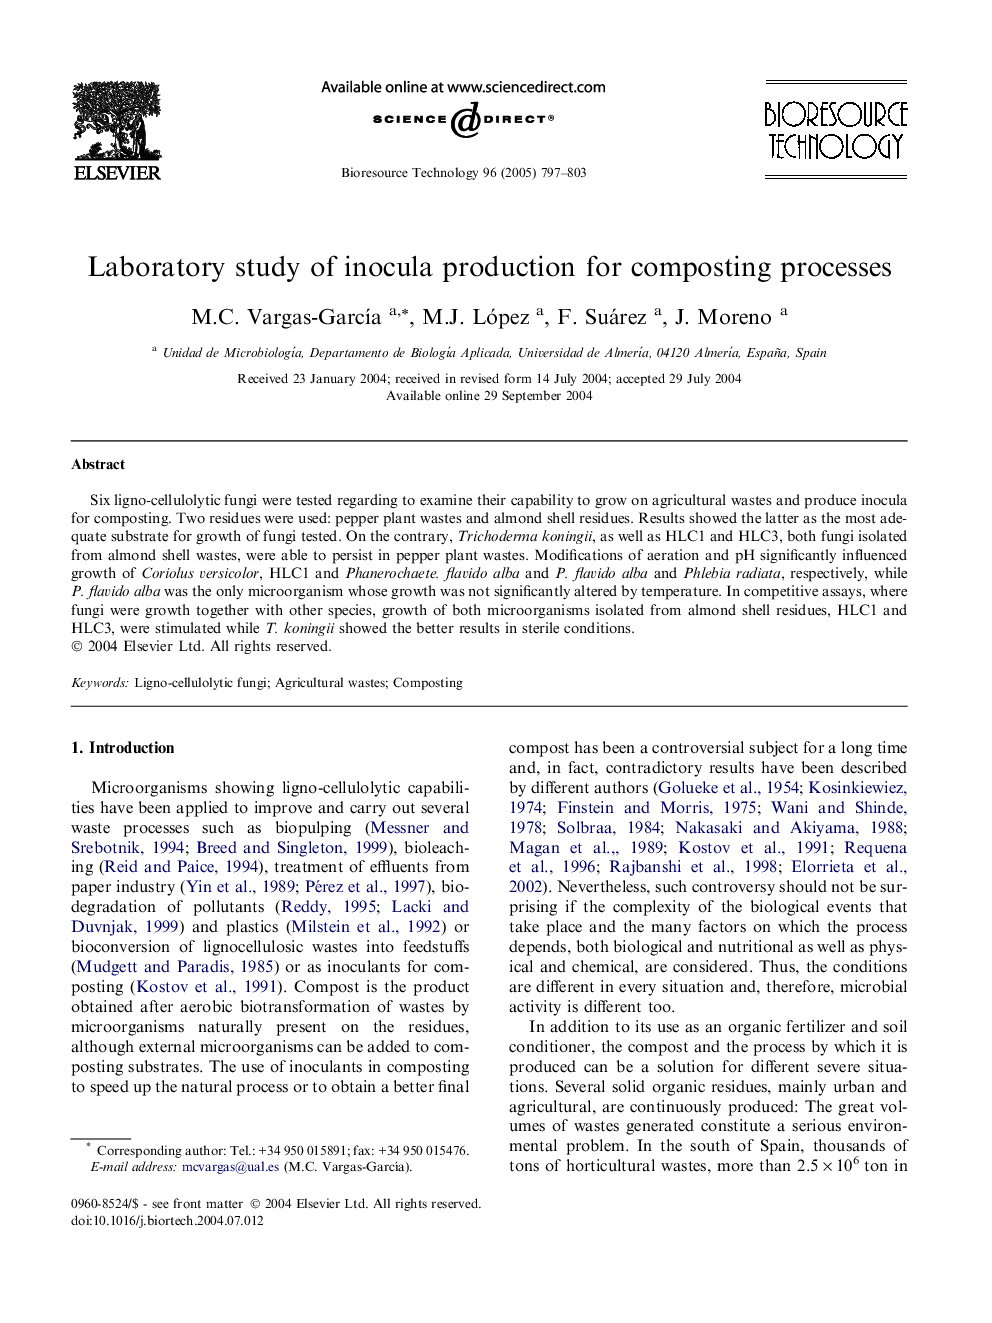 Laboratory study of inocula production for composting processes